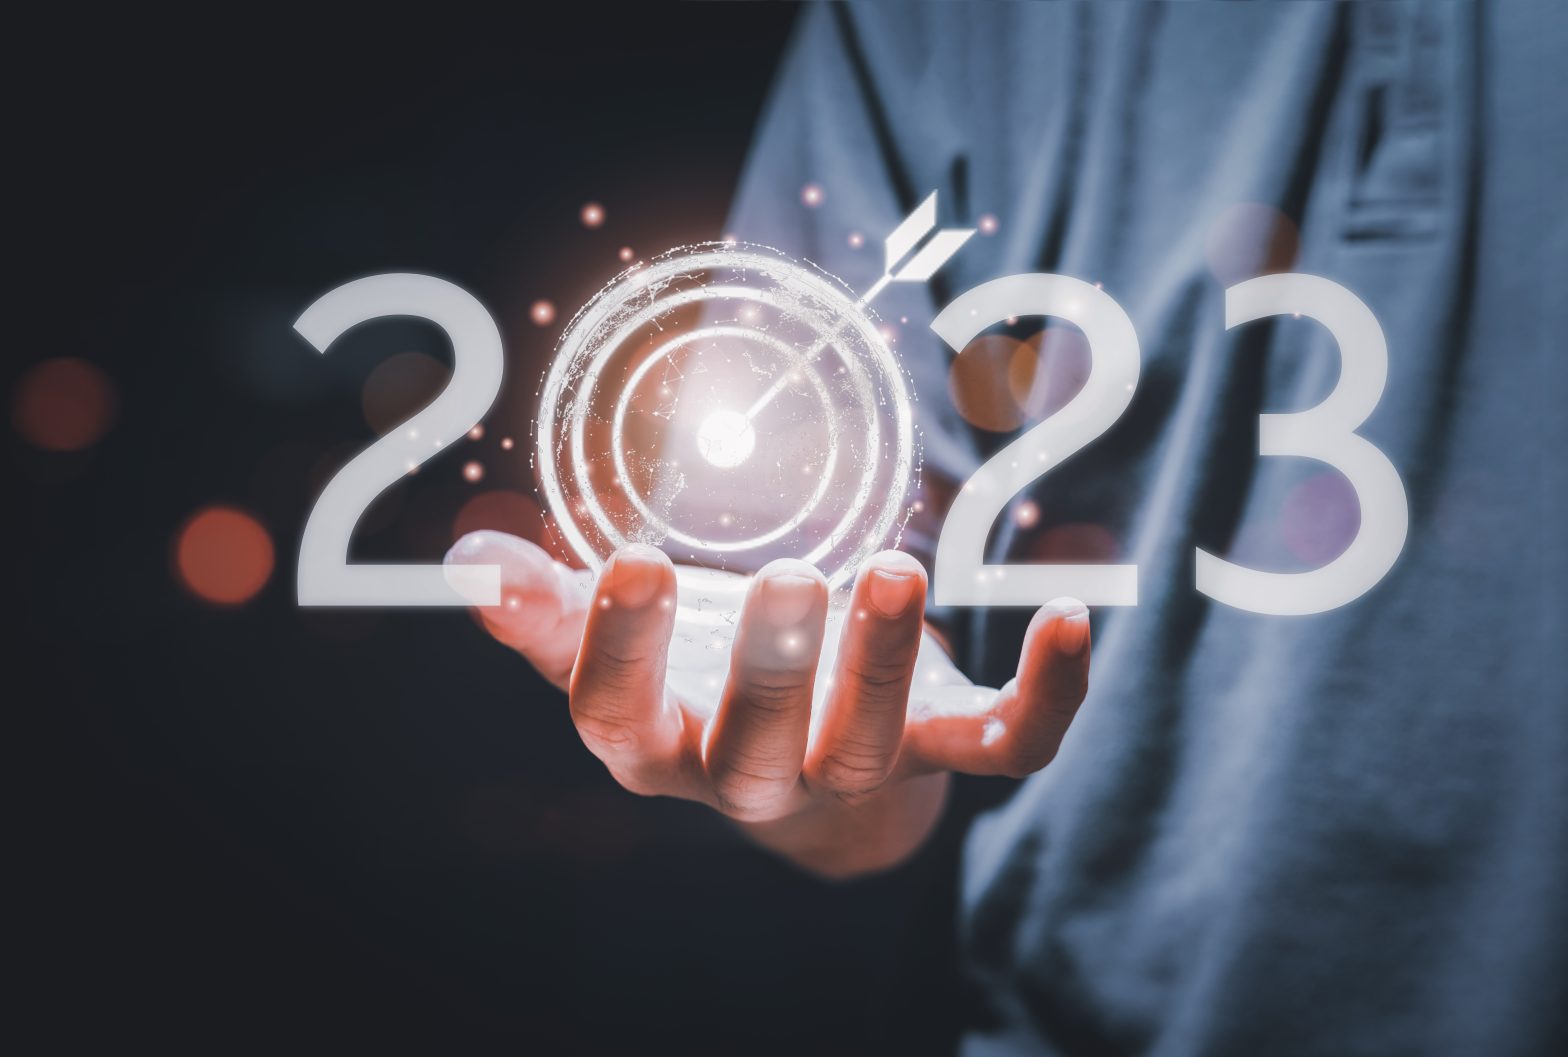 Give Your Business An Advantage In 2023 Prepare Your Business For A Successful 2023 With These 3 New Year’s Tech Resolutions